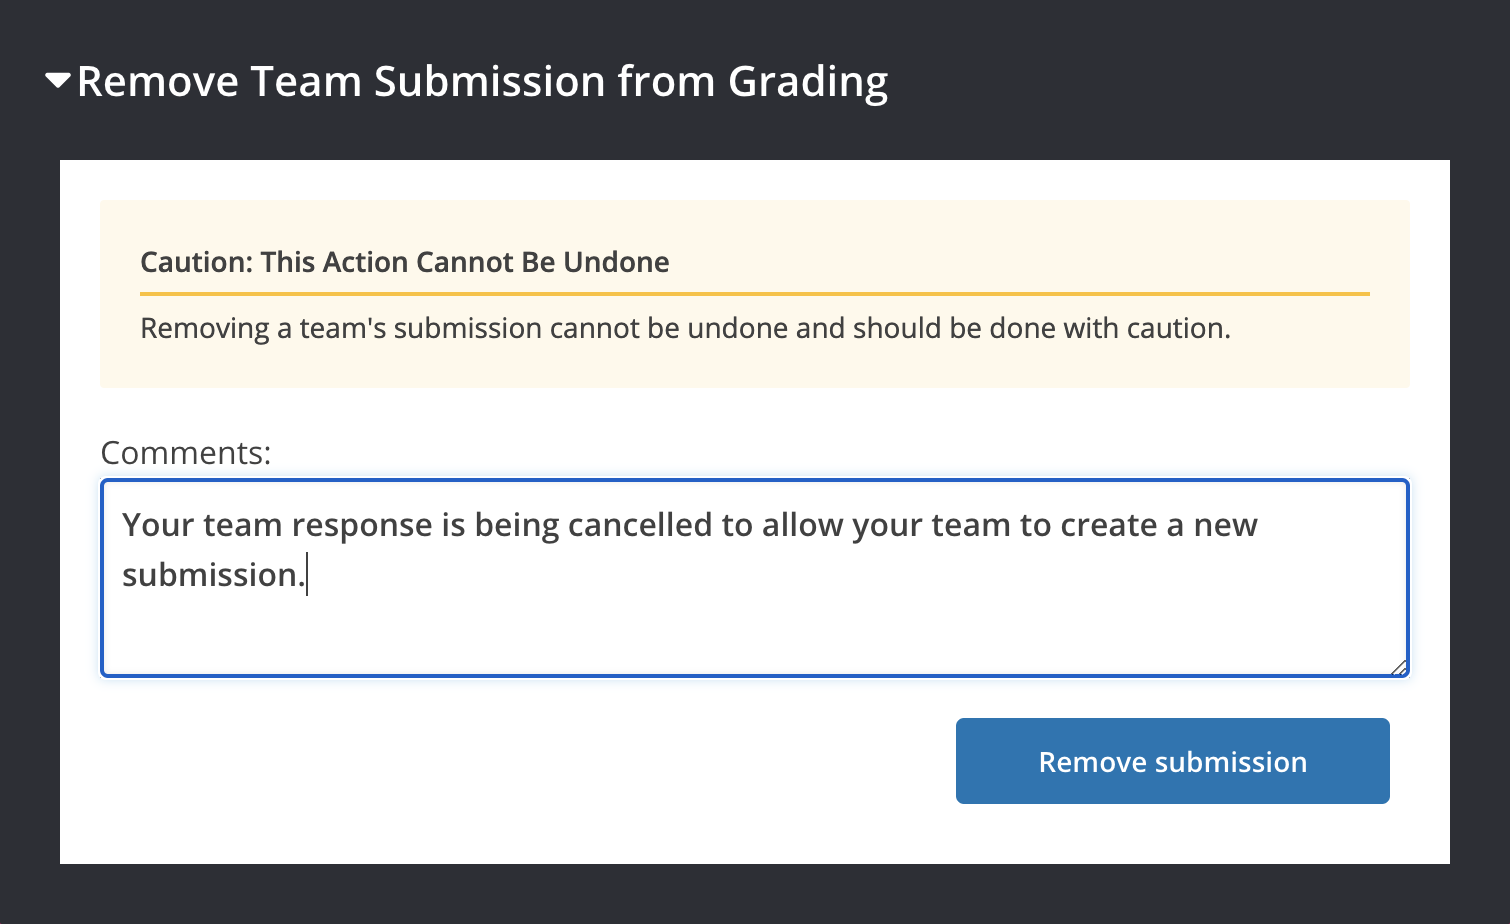 Dialog allowing comments to be entered when removing a team submission.